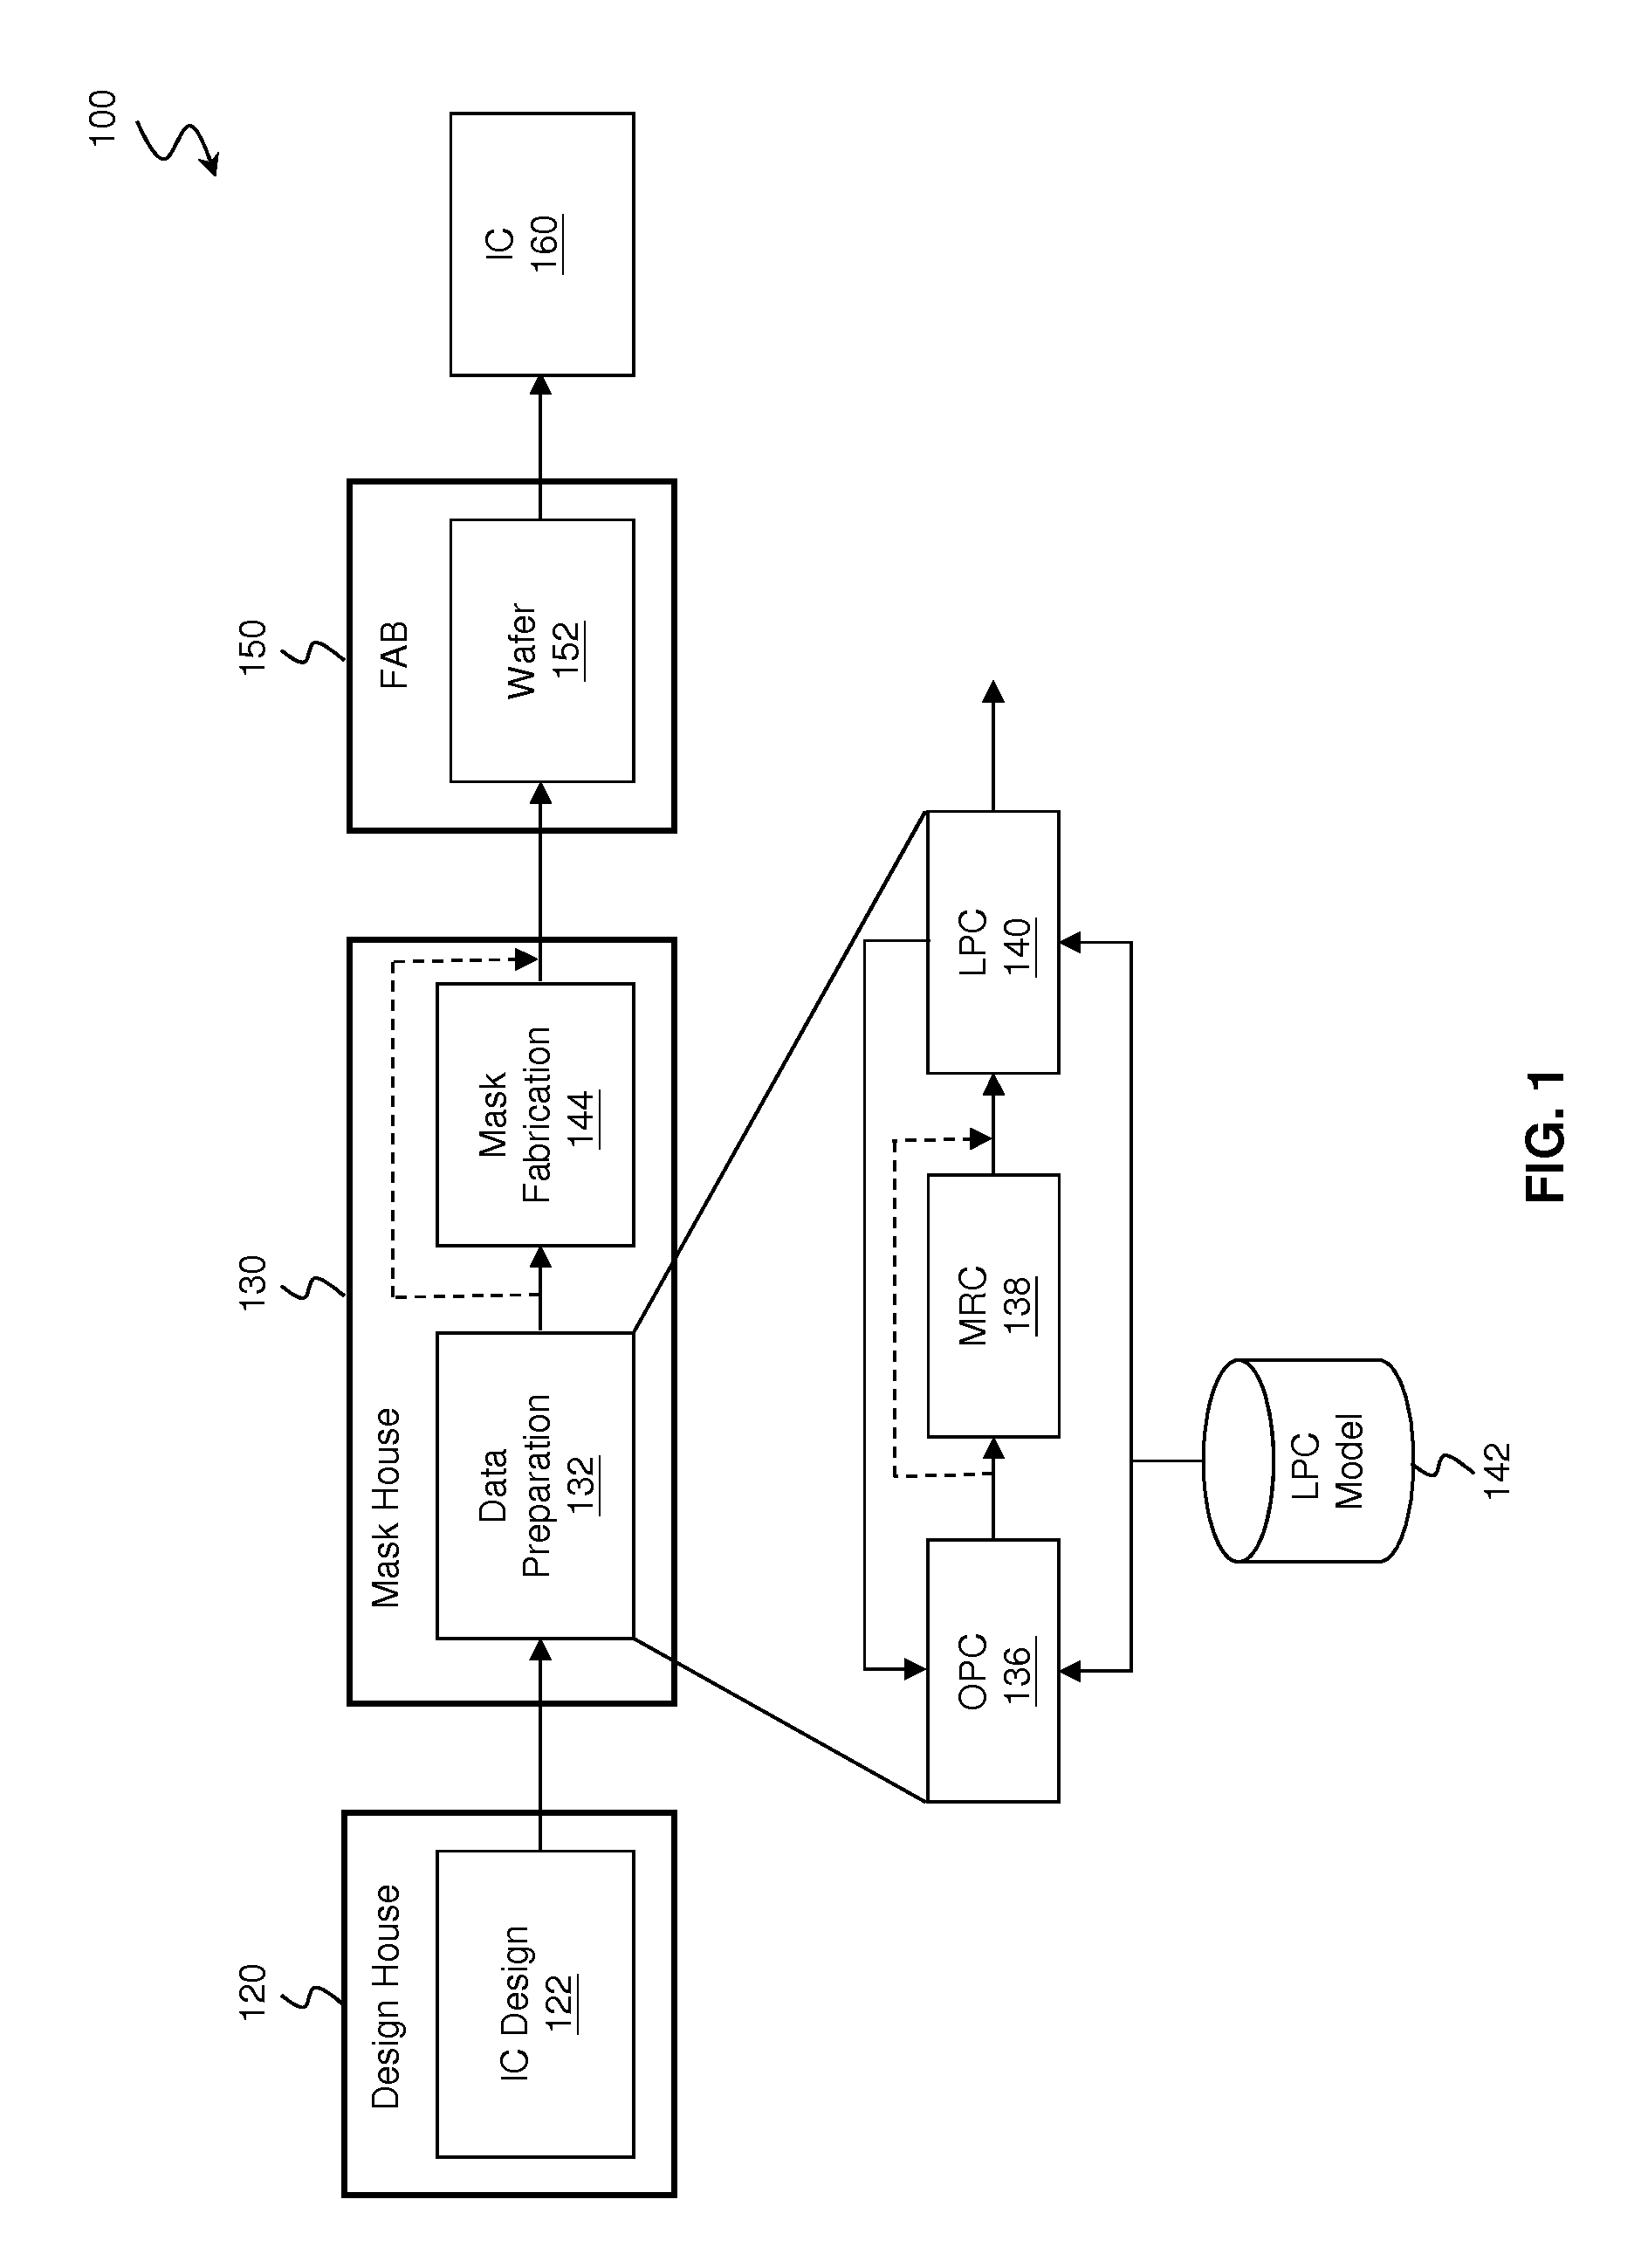 System and Method for Integrated Circuit Manufacturing